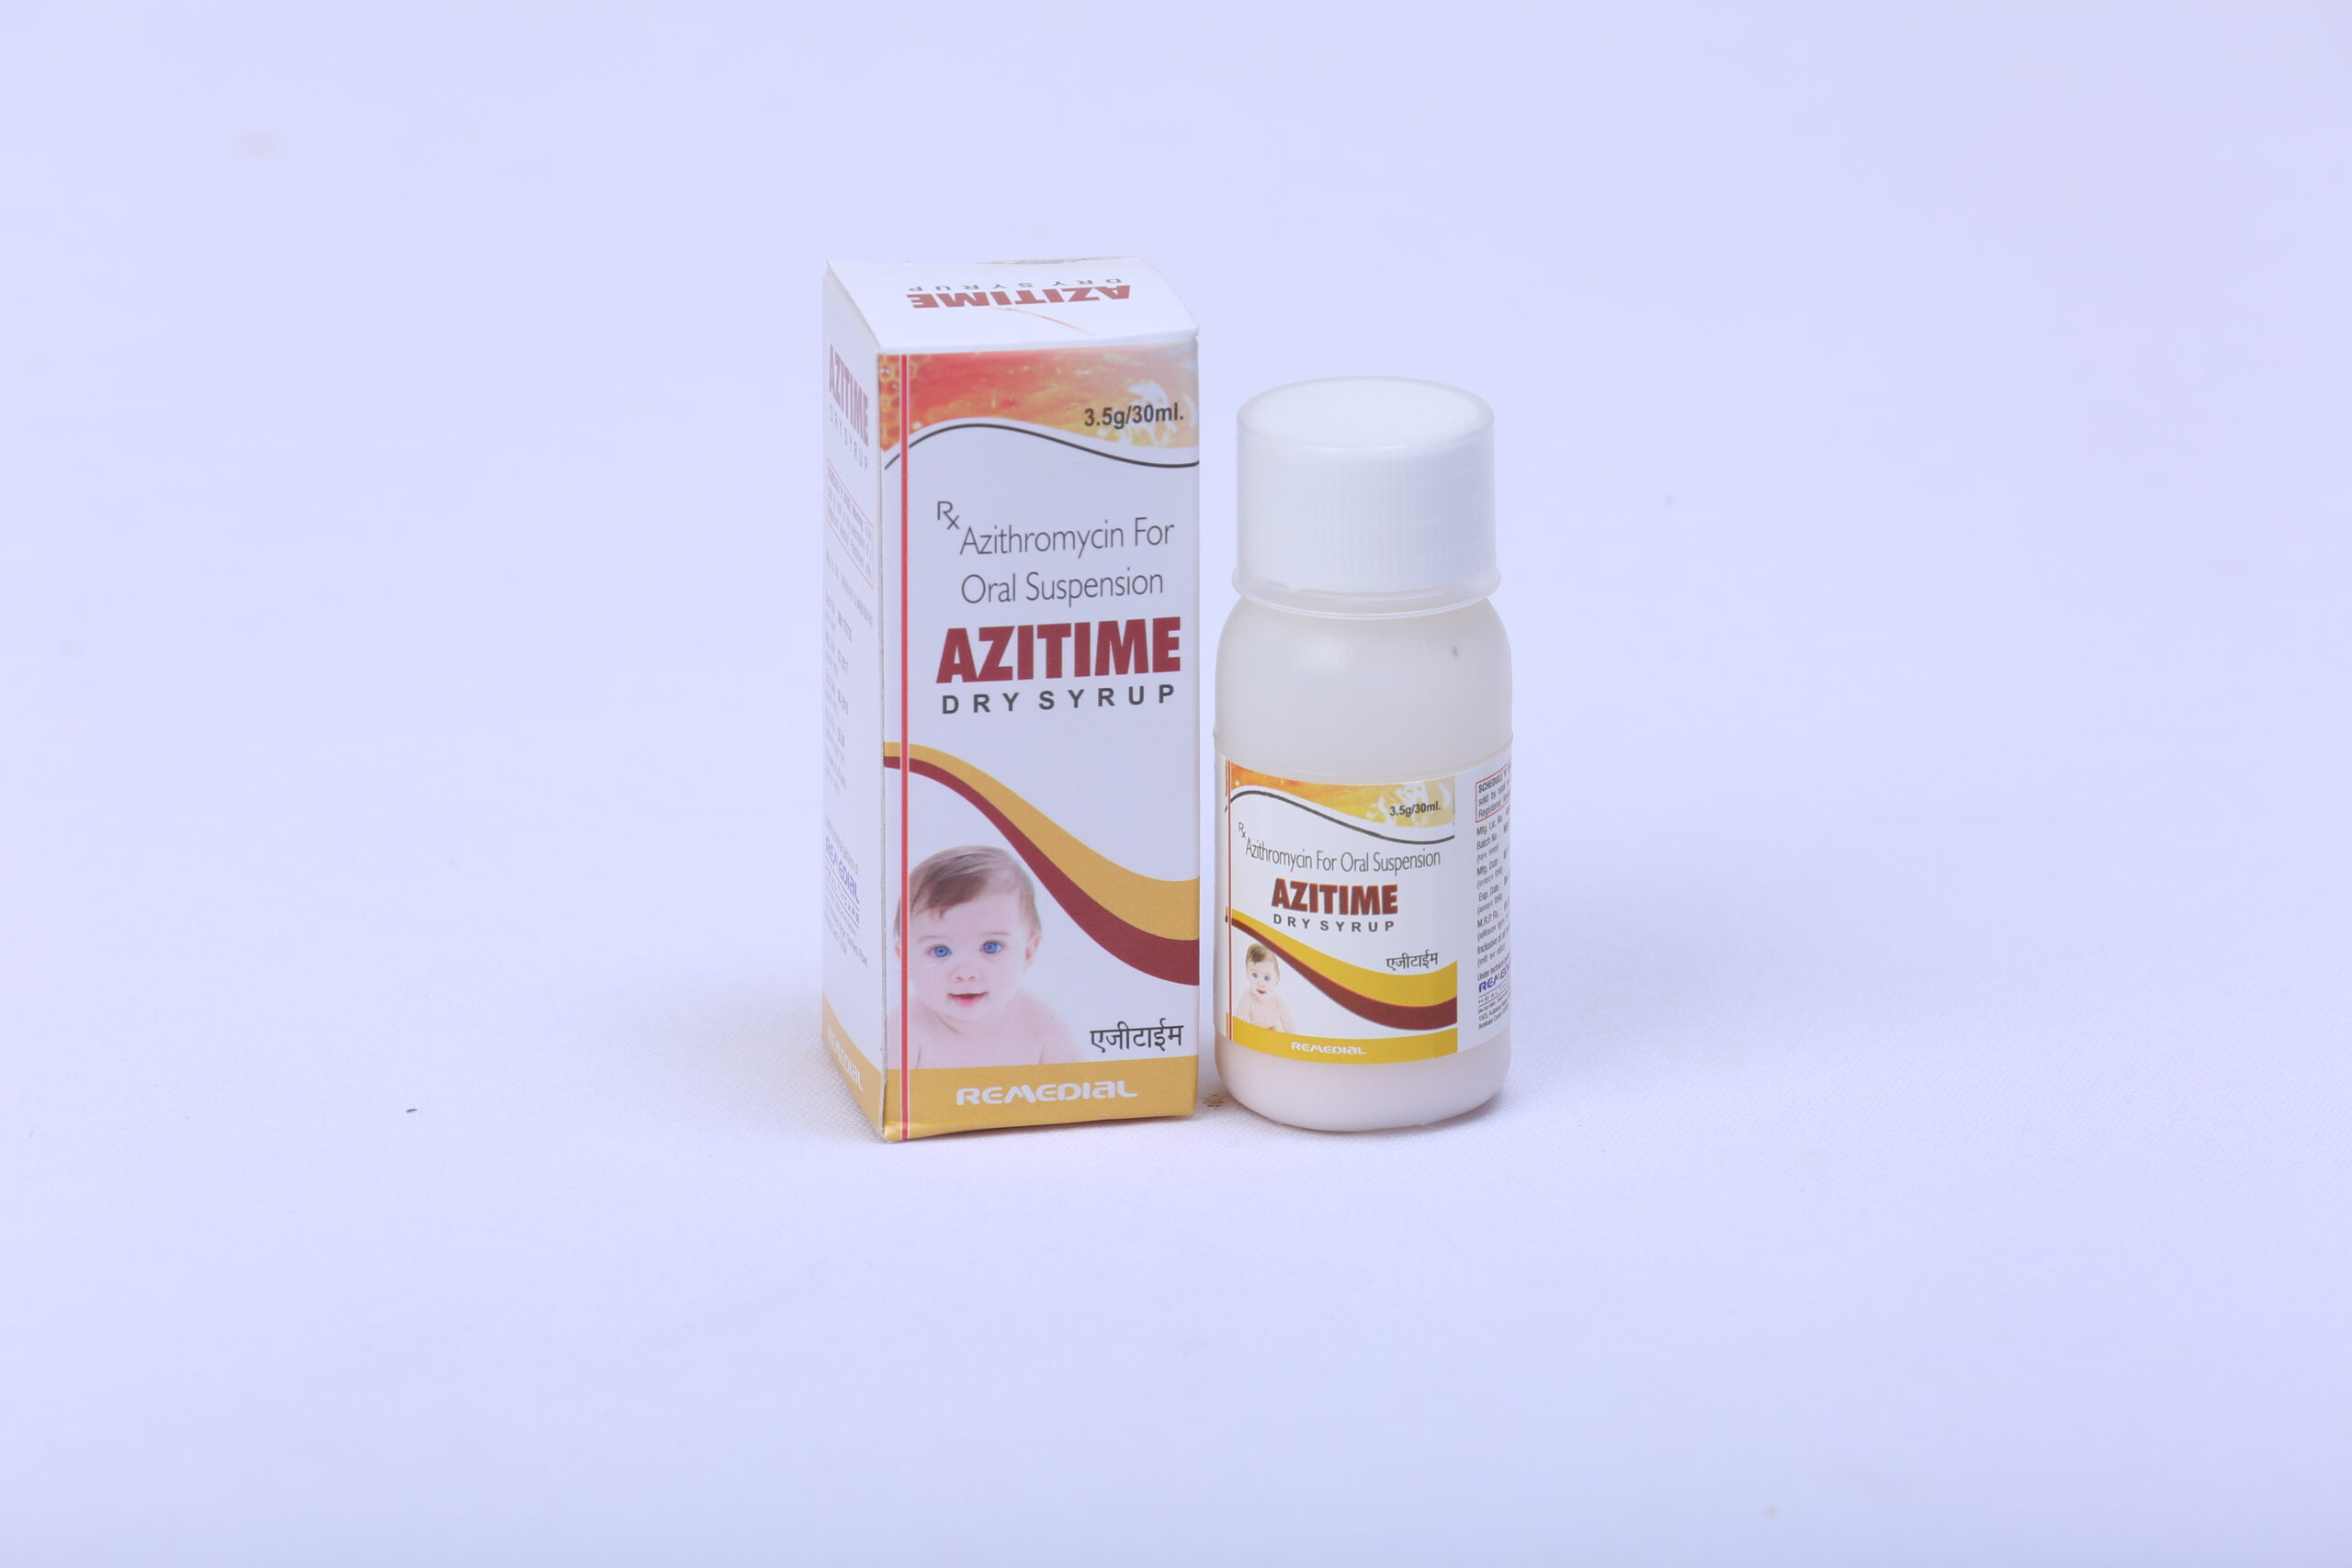 AZITIME (Azithromycin Dihydrate Dry Syrup)